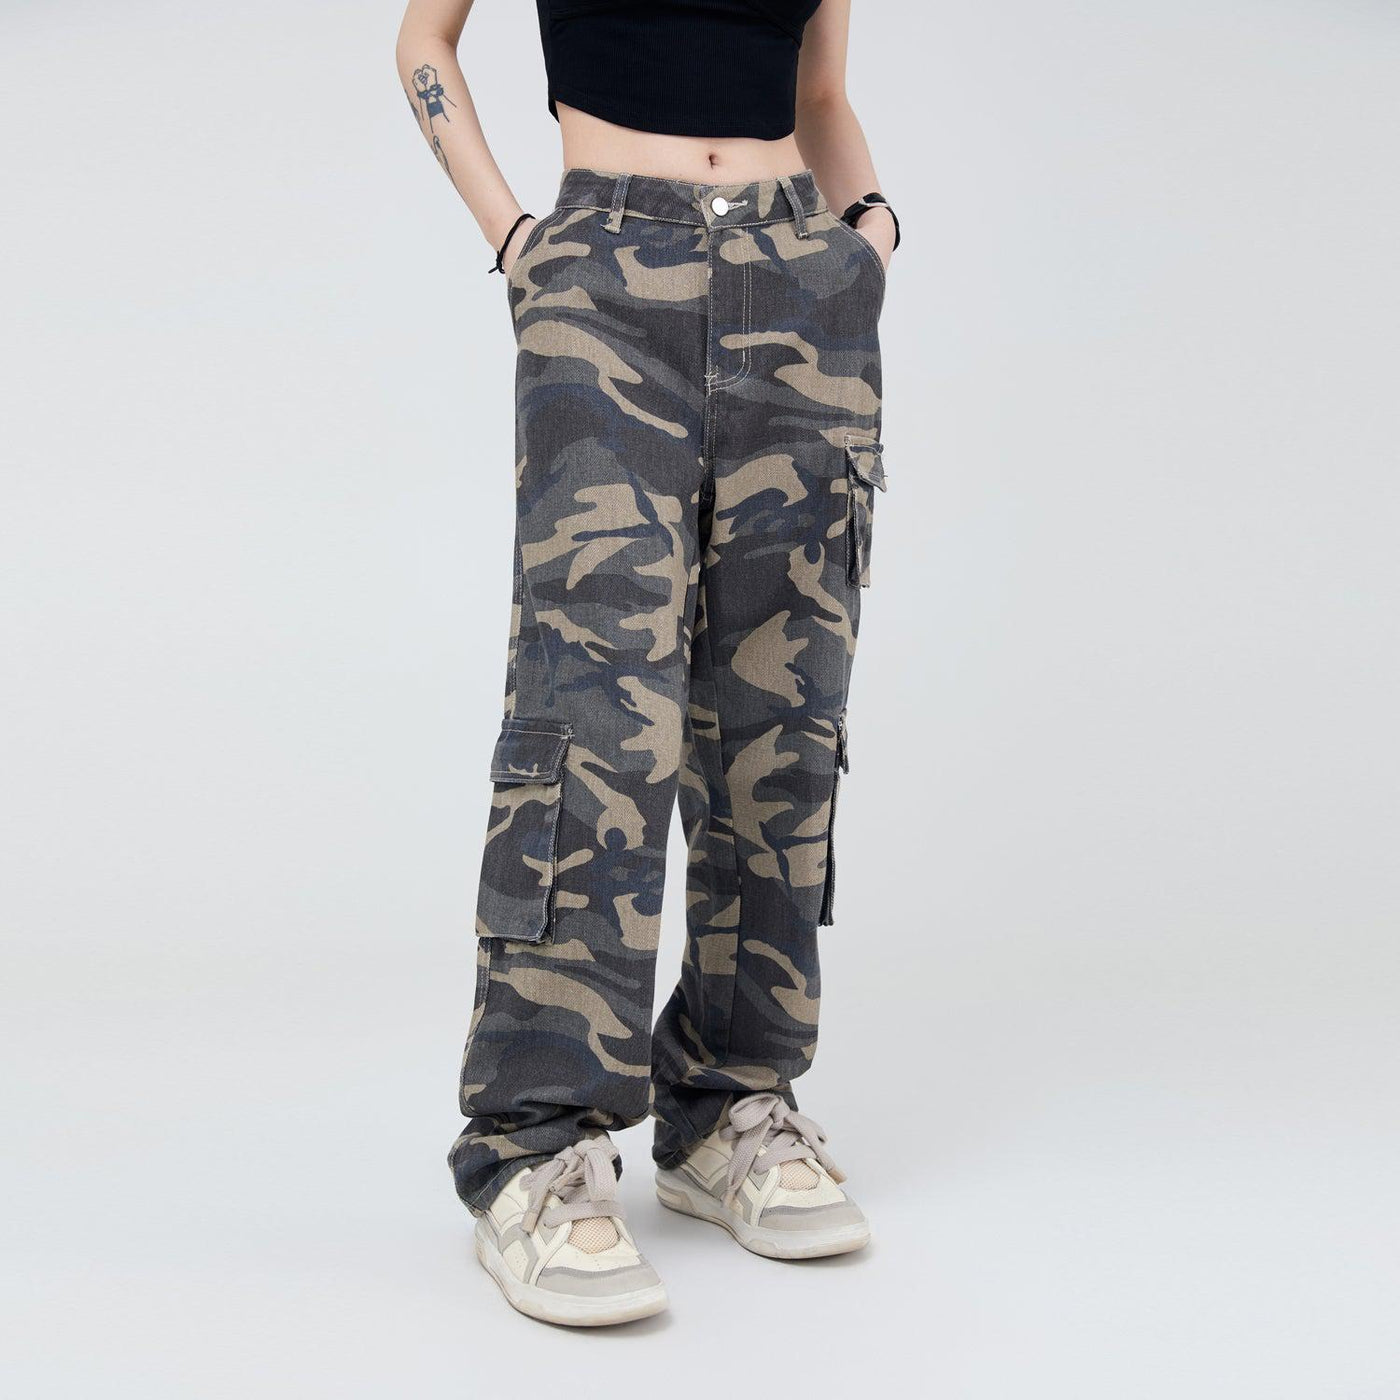 Made Extreme Flap Pocket Camouflage Cargo Pants Korean Street Fashion Pants By Made Extreme Shop Online at OH Vault